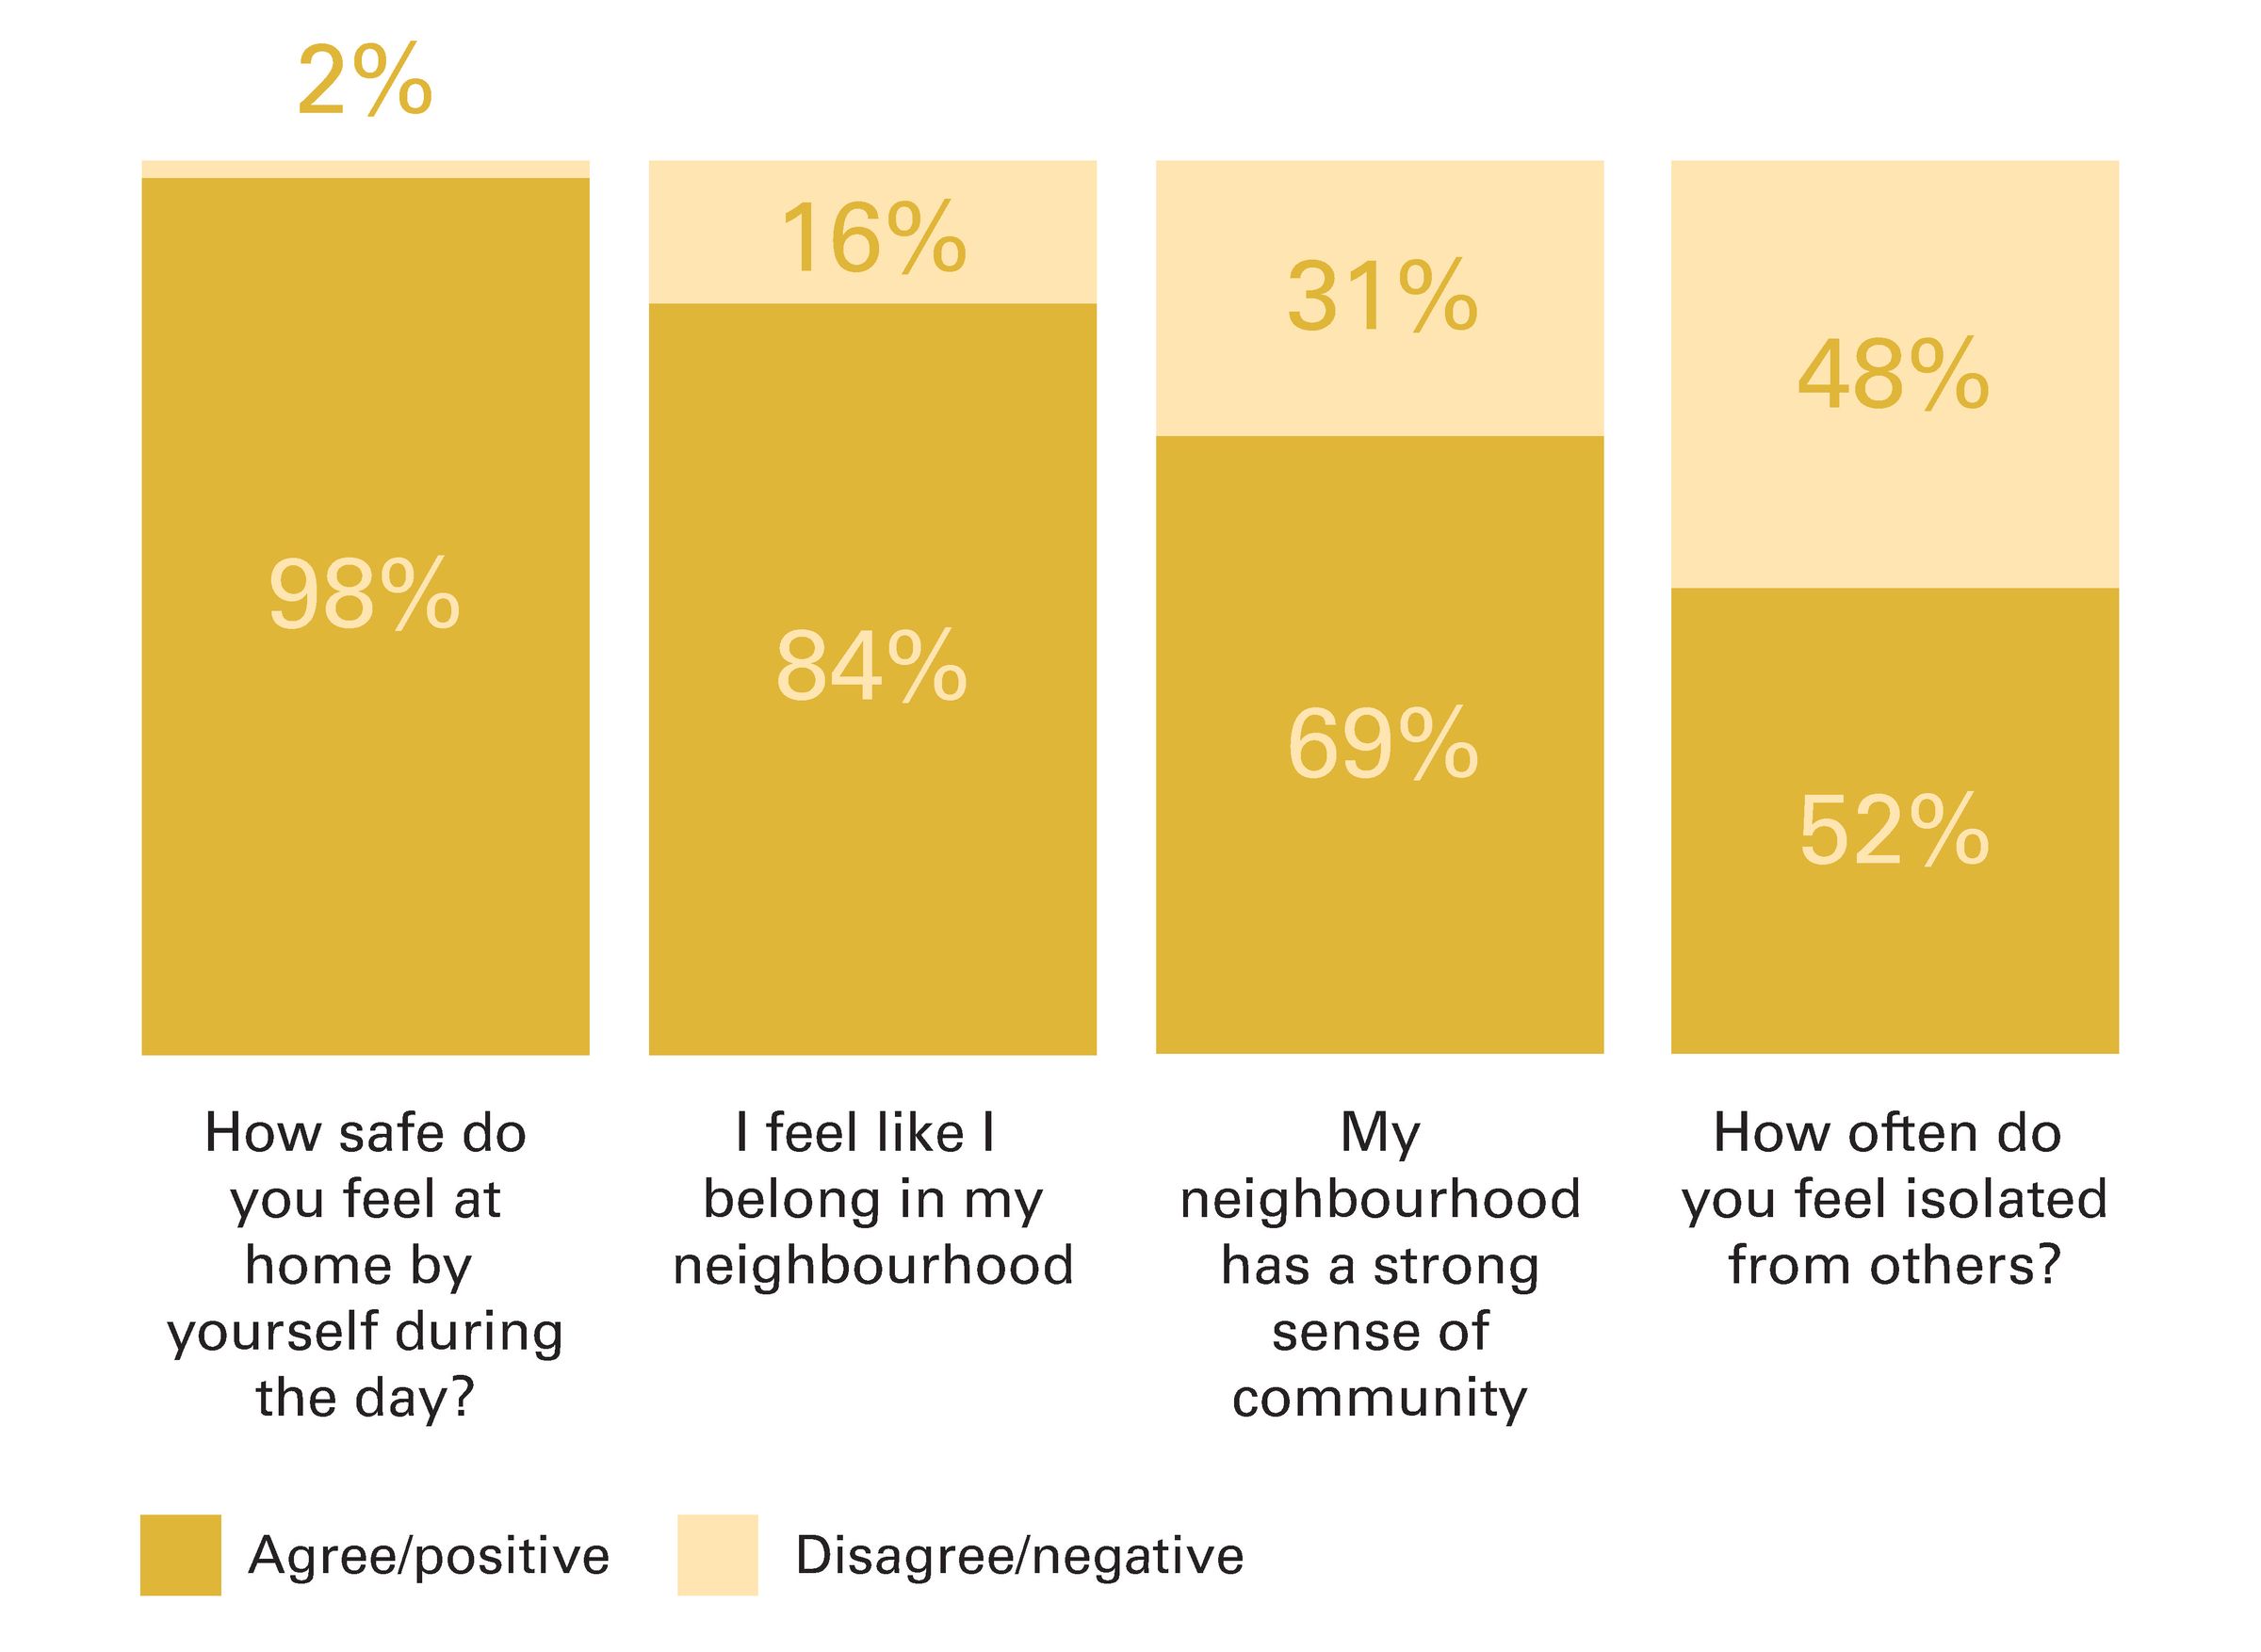 Graphs showing the results of a survey on personal and place belonging. The graphs show that 98% of people feel safe at home, 84% of people feel as though they belong in their neighbourhood, 69% have a strong sense of community, and 52% feel isolated.